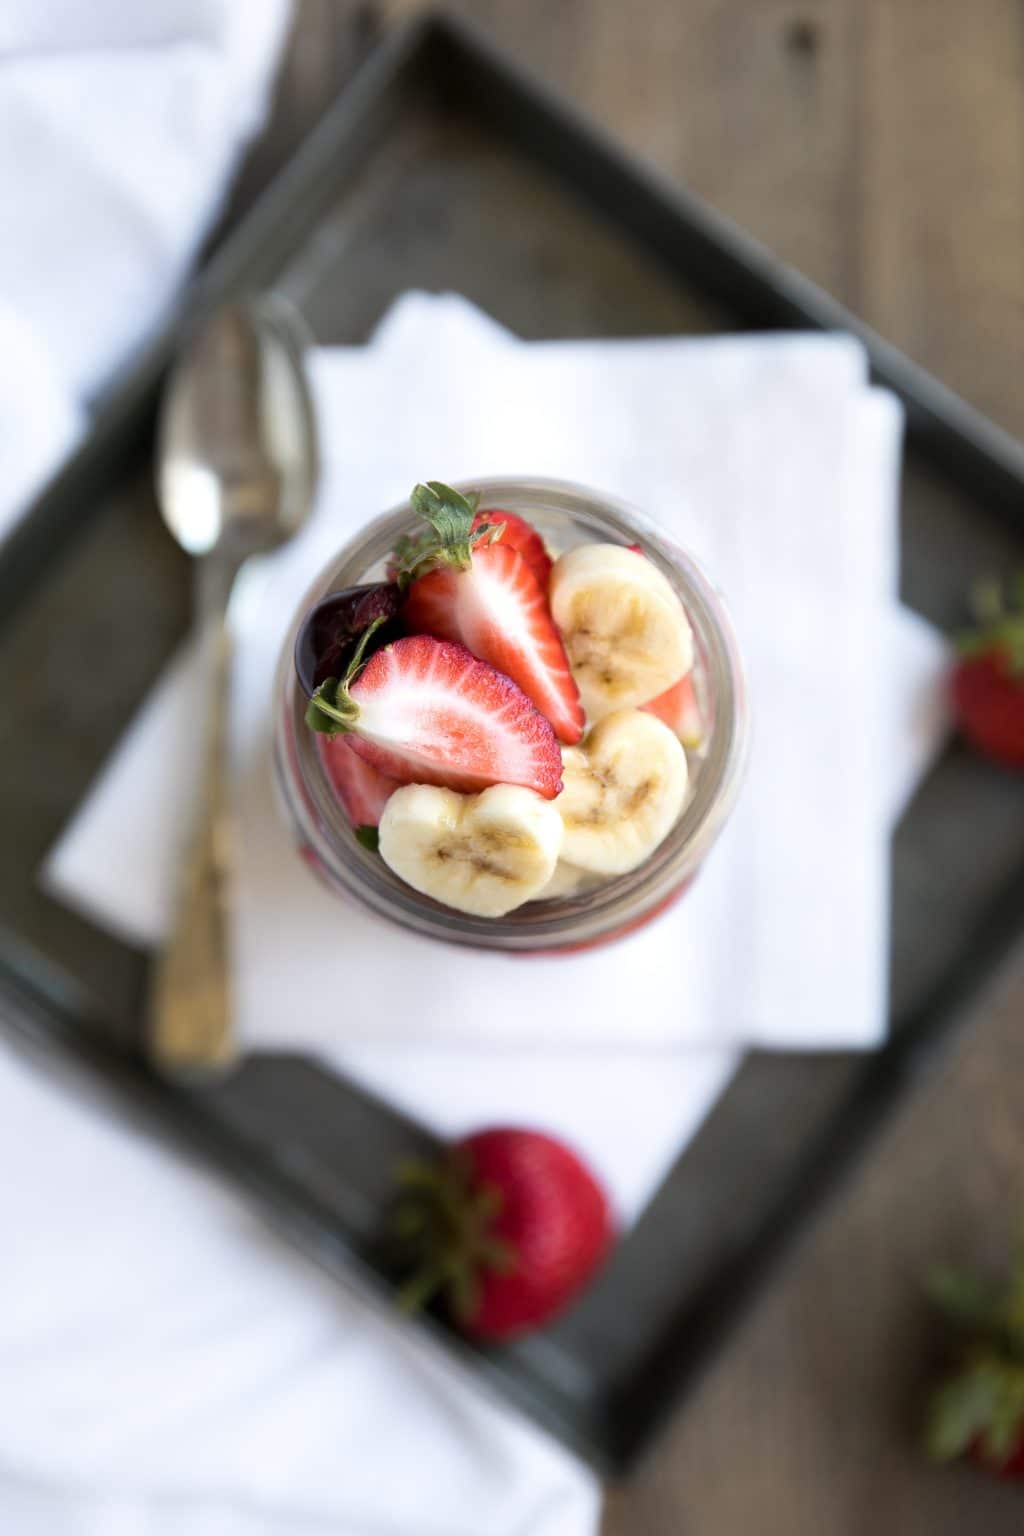 Strawberry Banana Overnight Oats with Peanut Butter